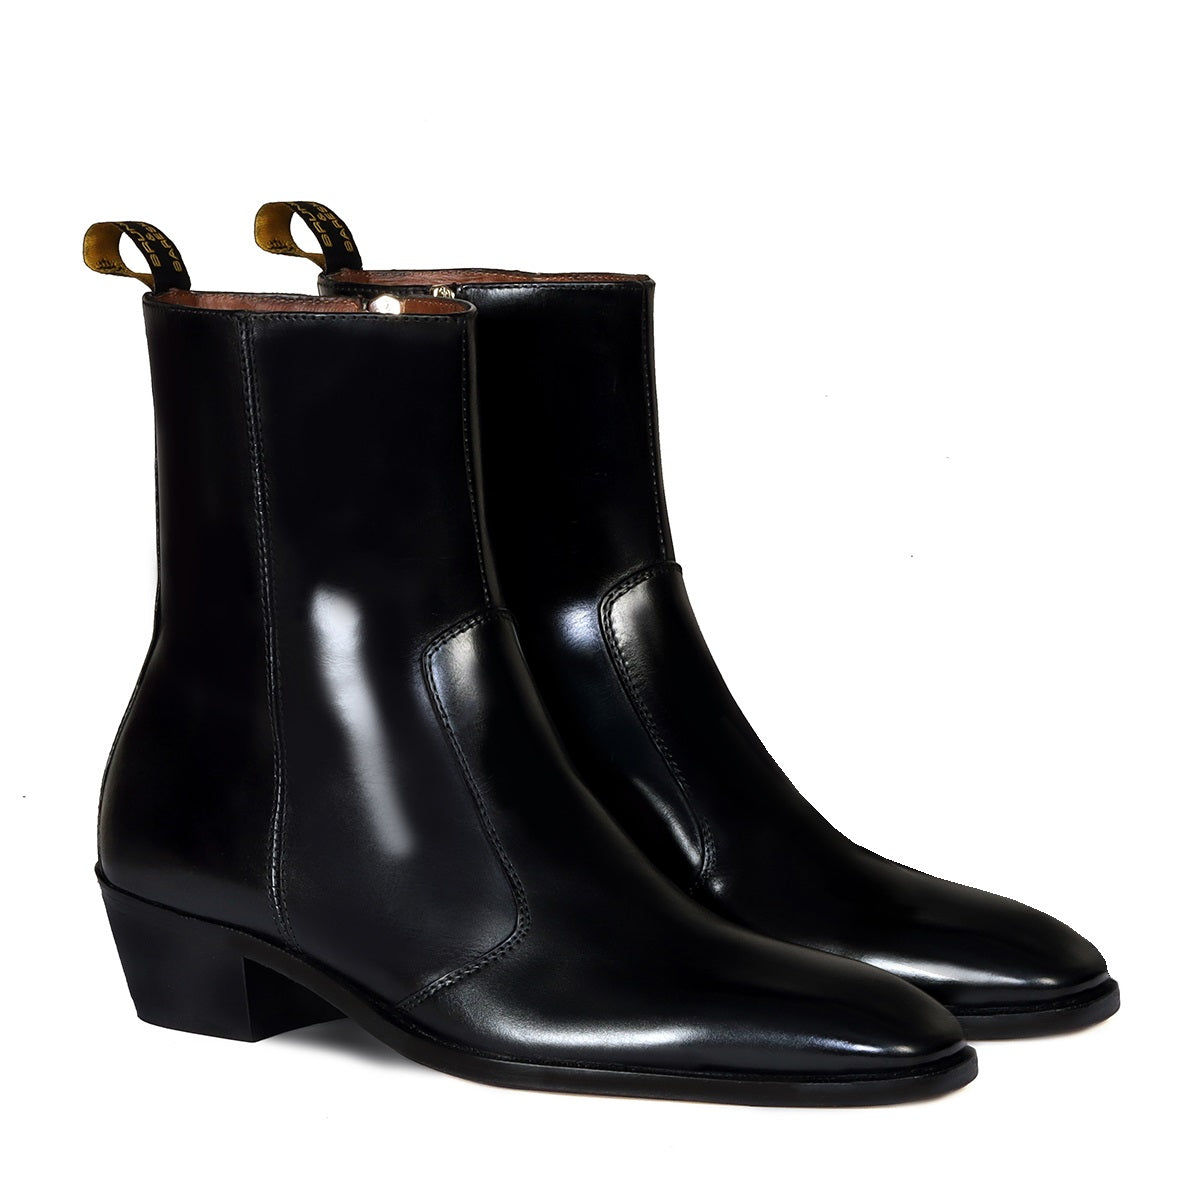 Cuban Heel Boots Stitched Black Leather with Zip Closure by Brune & Bareskin